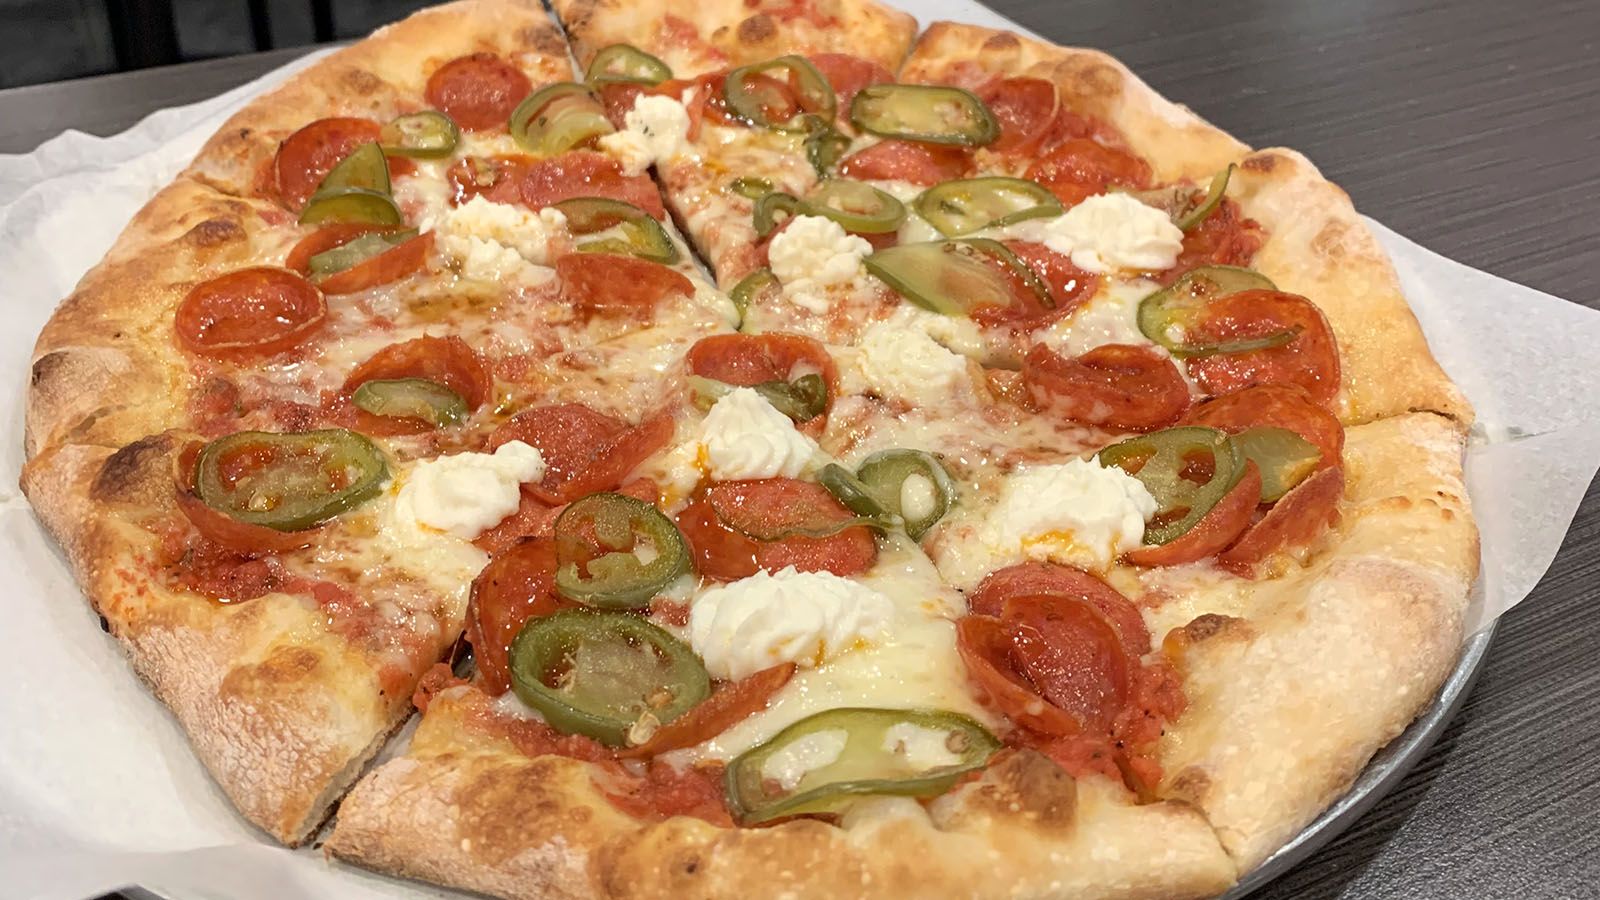 We have no shortage of quality pizza options, including Papi's Pizza on The Landing.